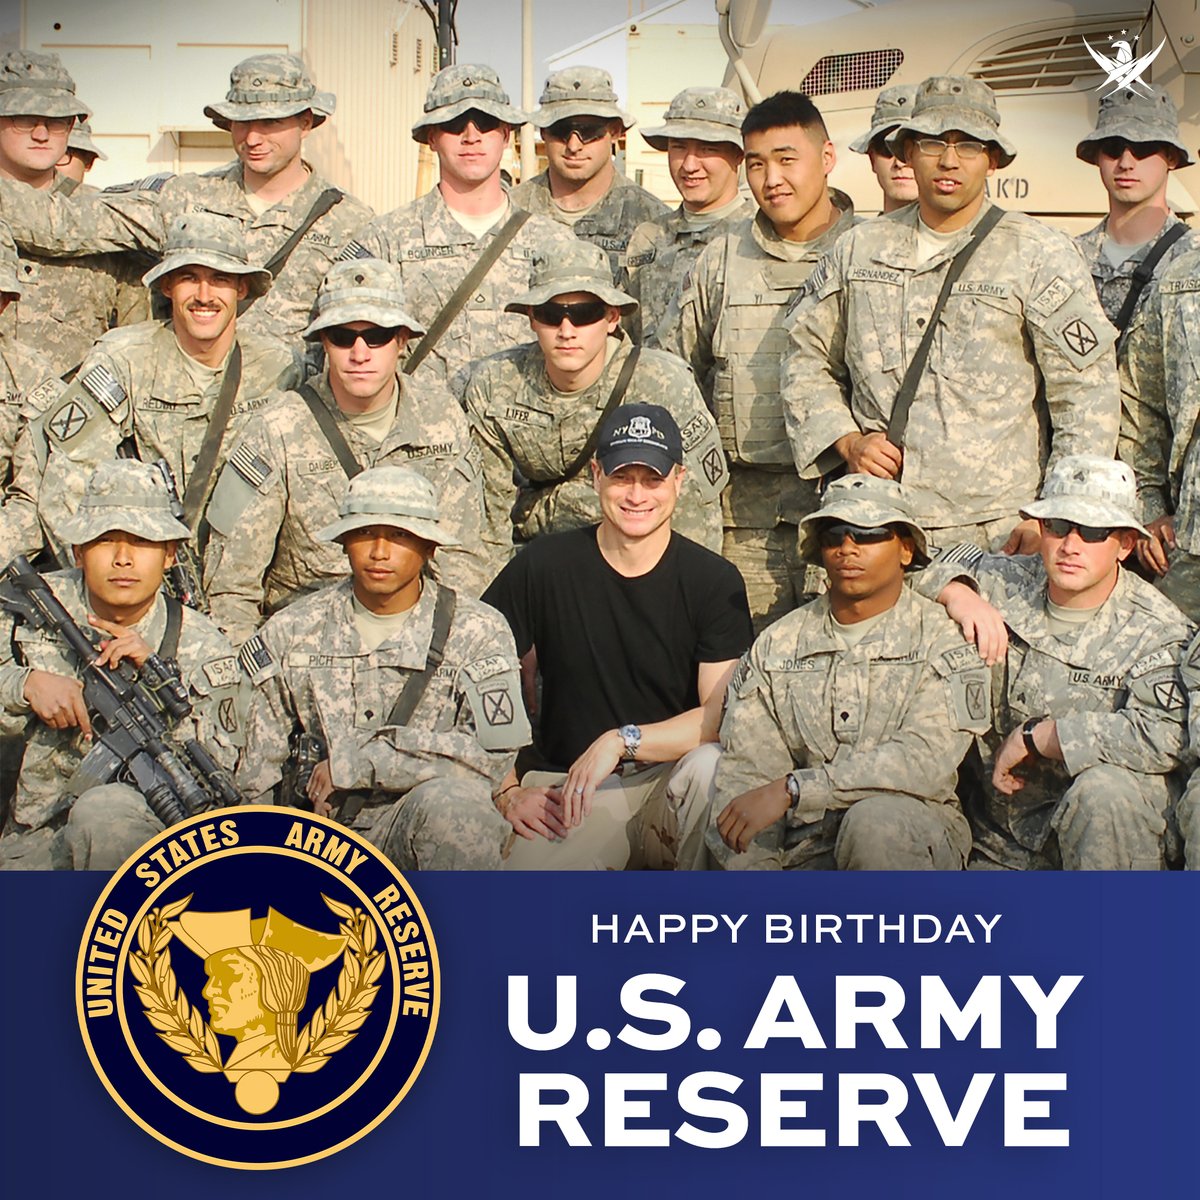 Happy 116th Birthday to the U.S. Army Reserve Command! Today, we celebrate the brave men and women of our nation's U.S. Army Reserve for their service to our nation. Happy Birthday!